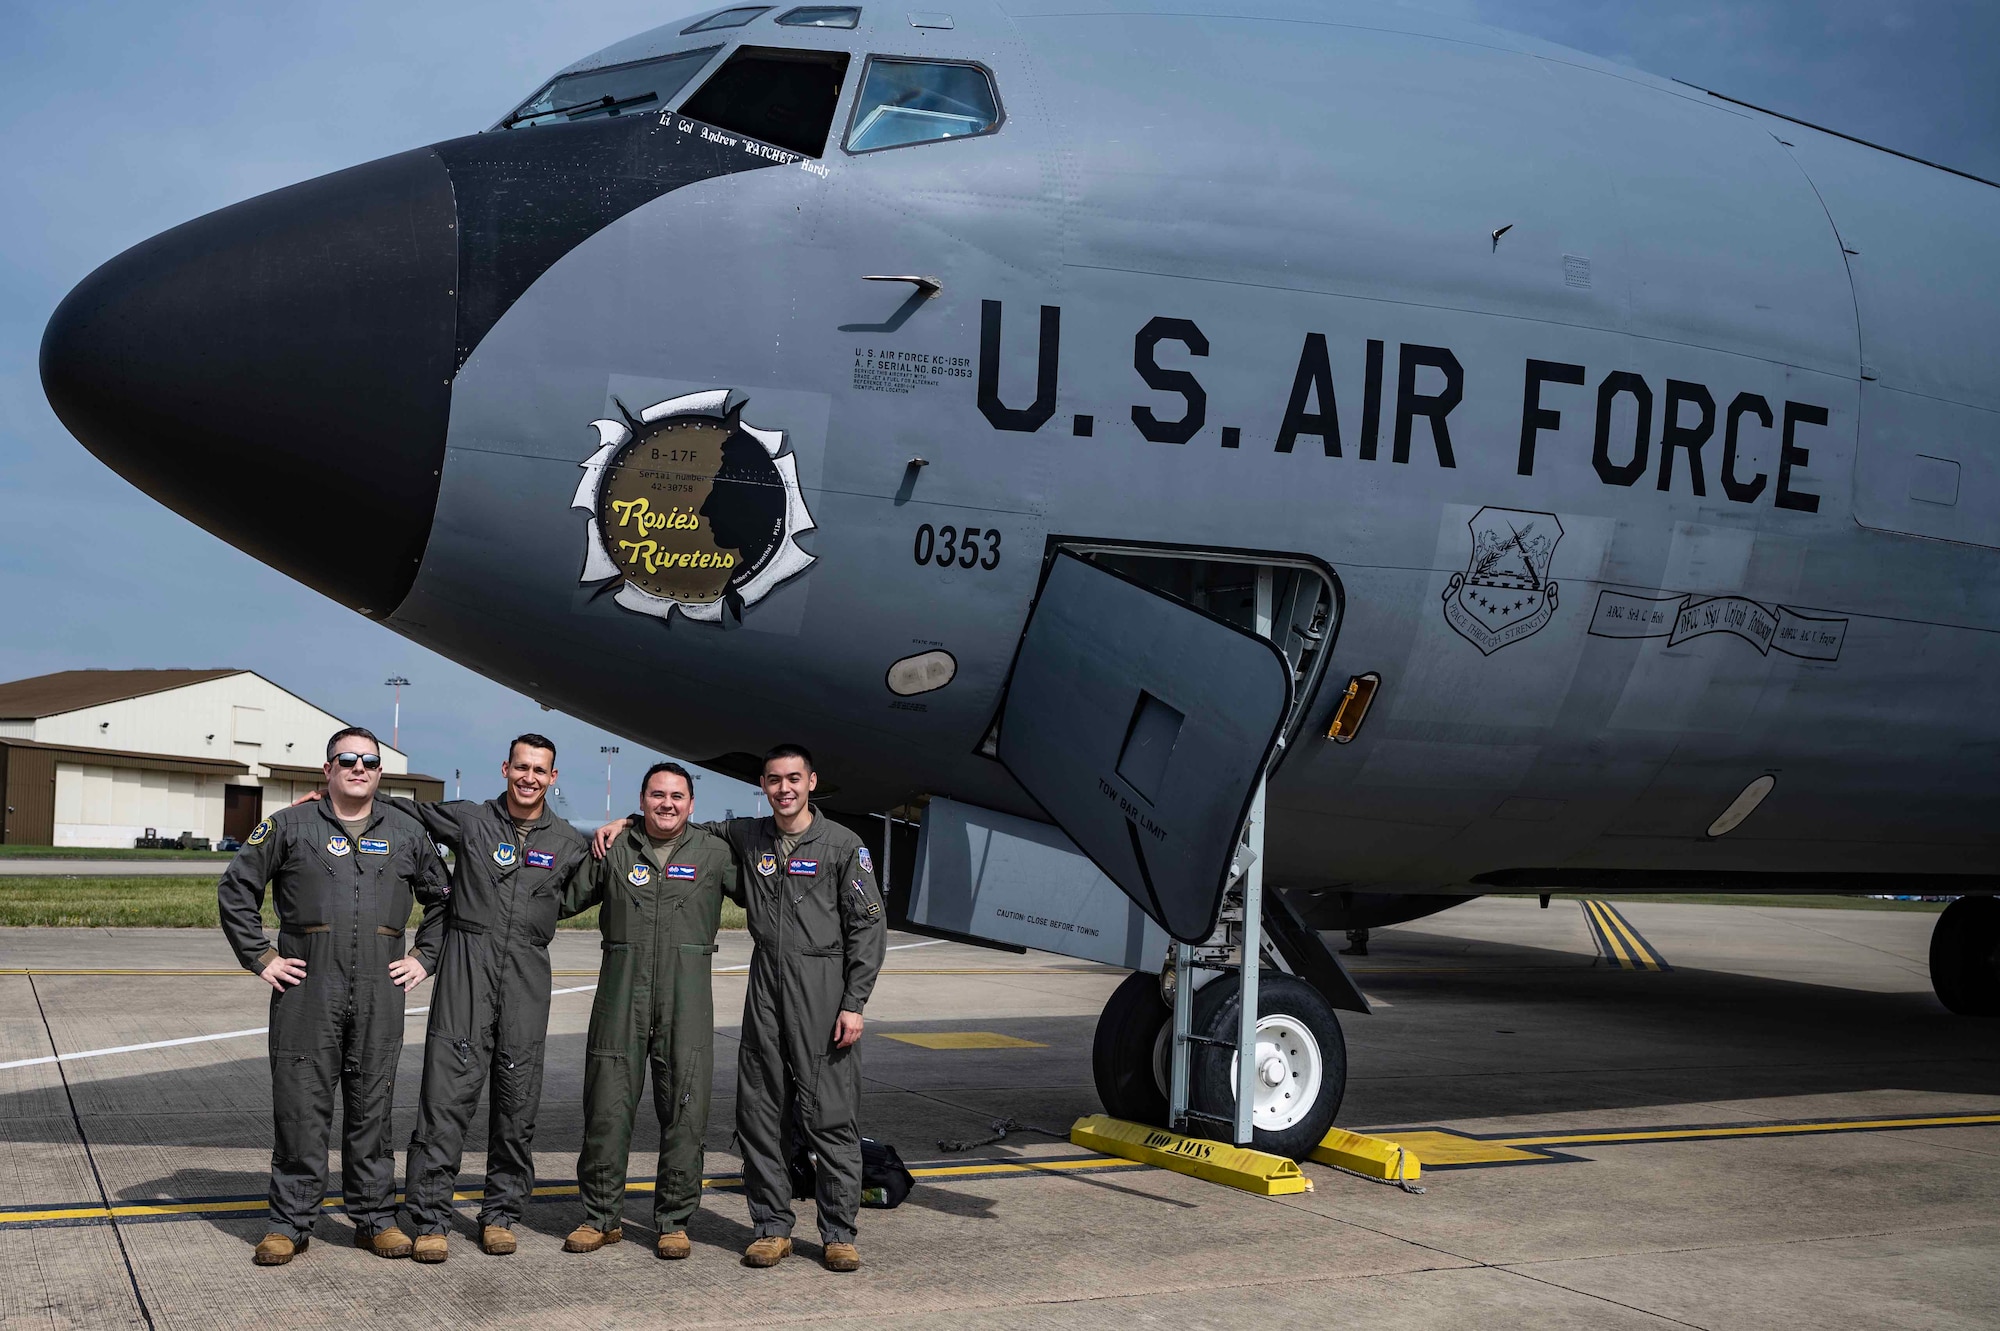 U.S. Air Force Staff Sgt. Miles Humphries (left), 351st Air Refueling Squadron KC-135 Stratotanker aircraft boom operator, Capt. Mitchell Hooper (middle left), 351st ARS pilot, Capt. Alejandro Rodriguez (middle right), 351st ARS pilot, and Senior Airman Jonathan Ross, 351st ARS KC-135 boom operator (right), stand for a group photo at Royal Air Force Mildenhall, England, Aug. 18, 2023. The 100th ARW’s KC-135s are a force multiplier that extend the reach of fighter, bomber and cargo aircraft. (U.S. Air Force photo by Senior Airman Viviam Chiu)